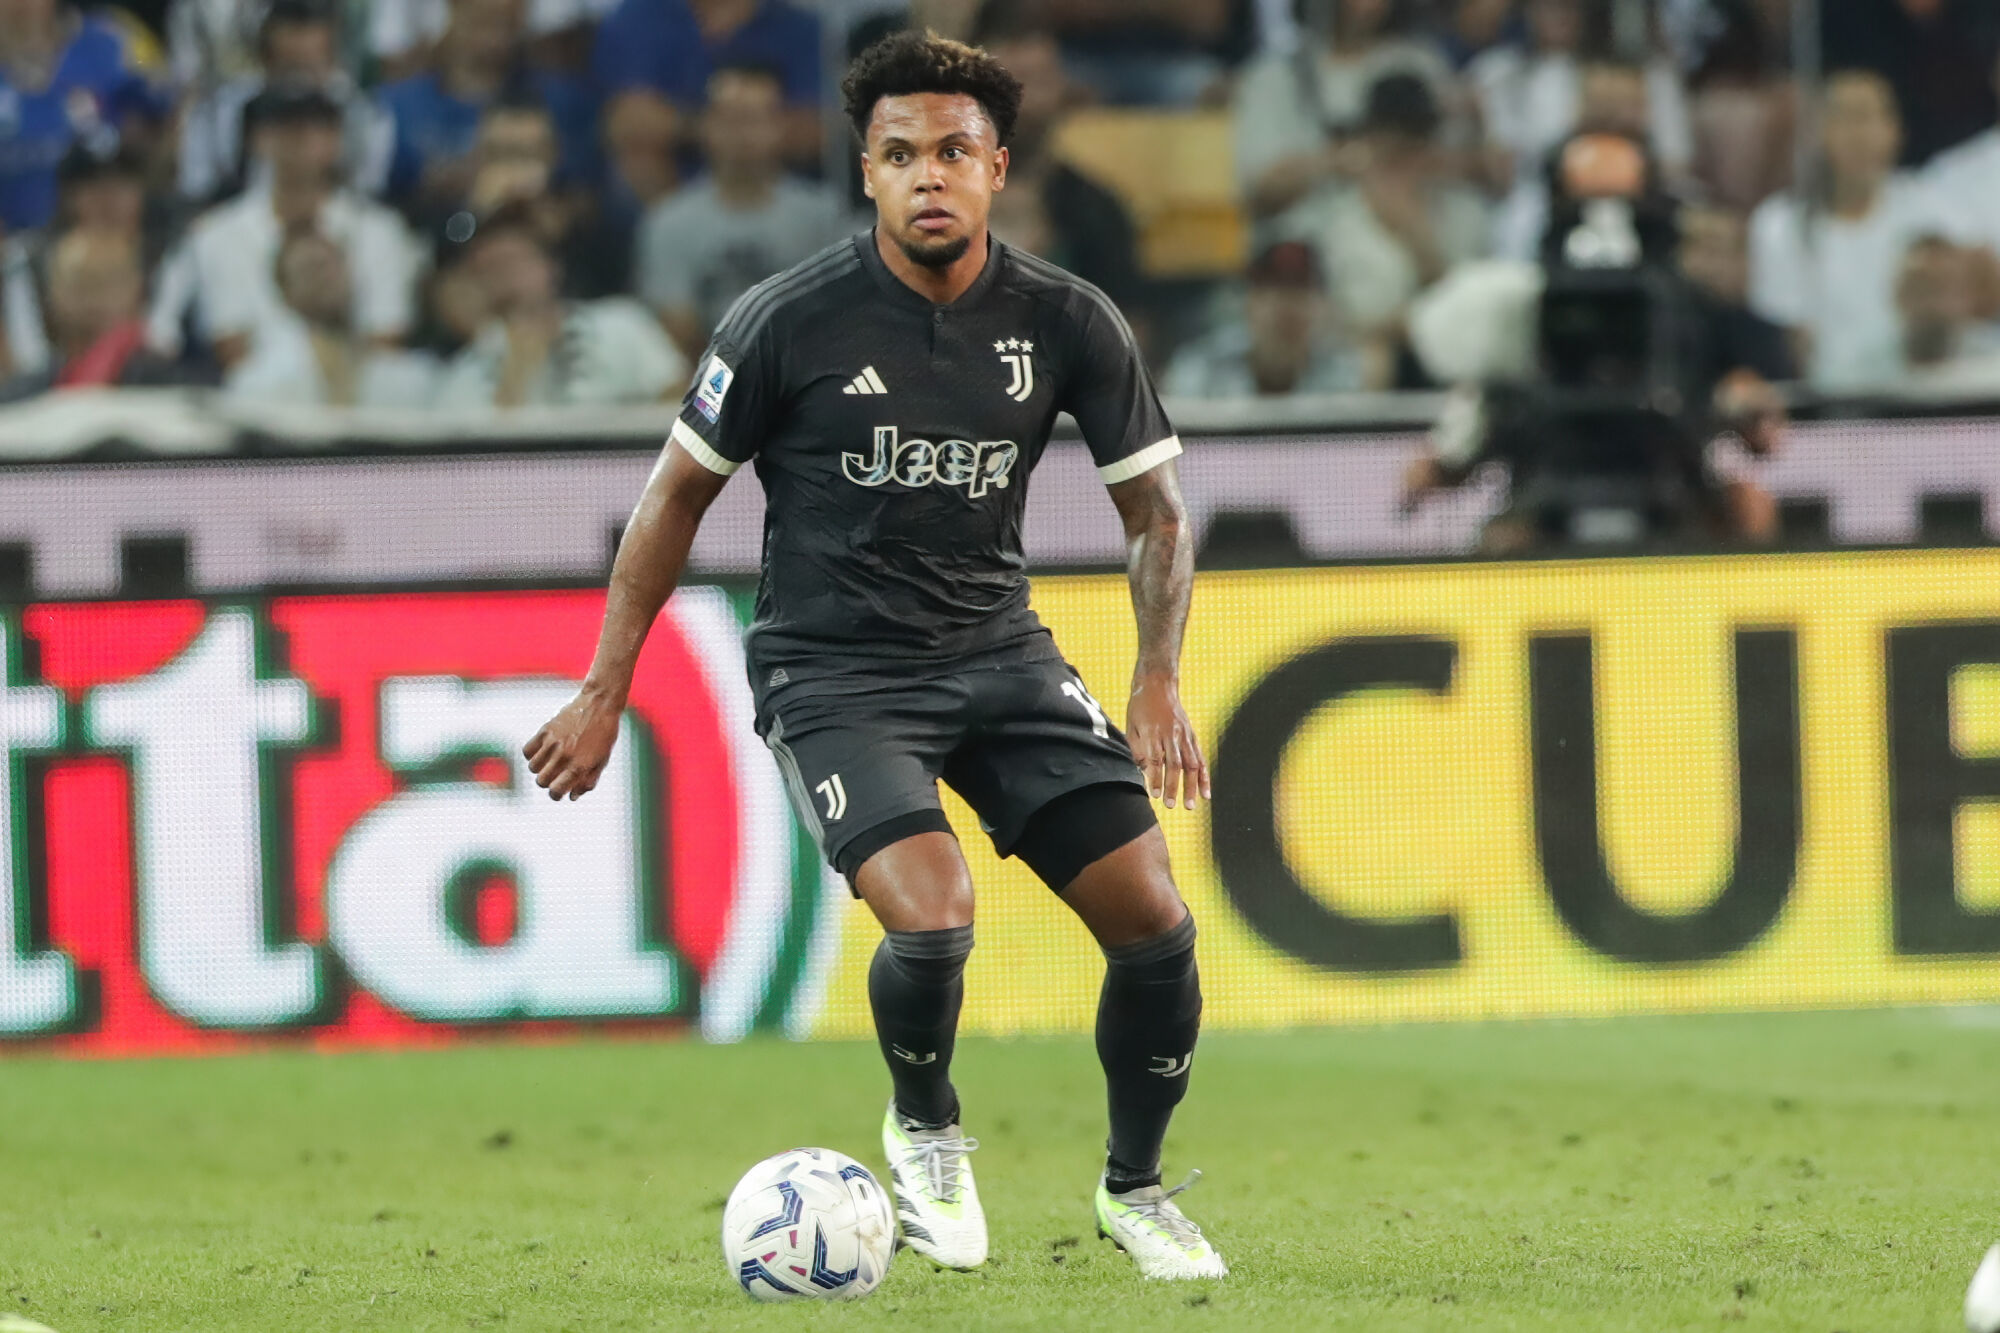 Weston McKennie’s Future at Juventus: Contract Extension and Potential Salary Increase